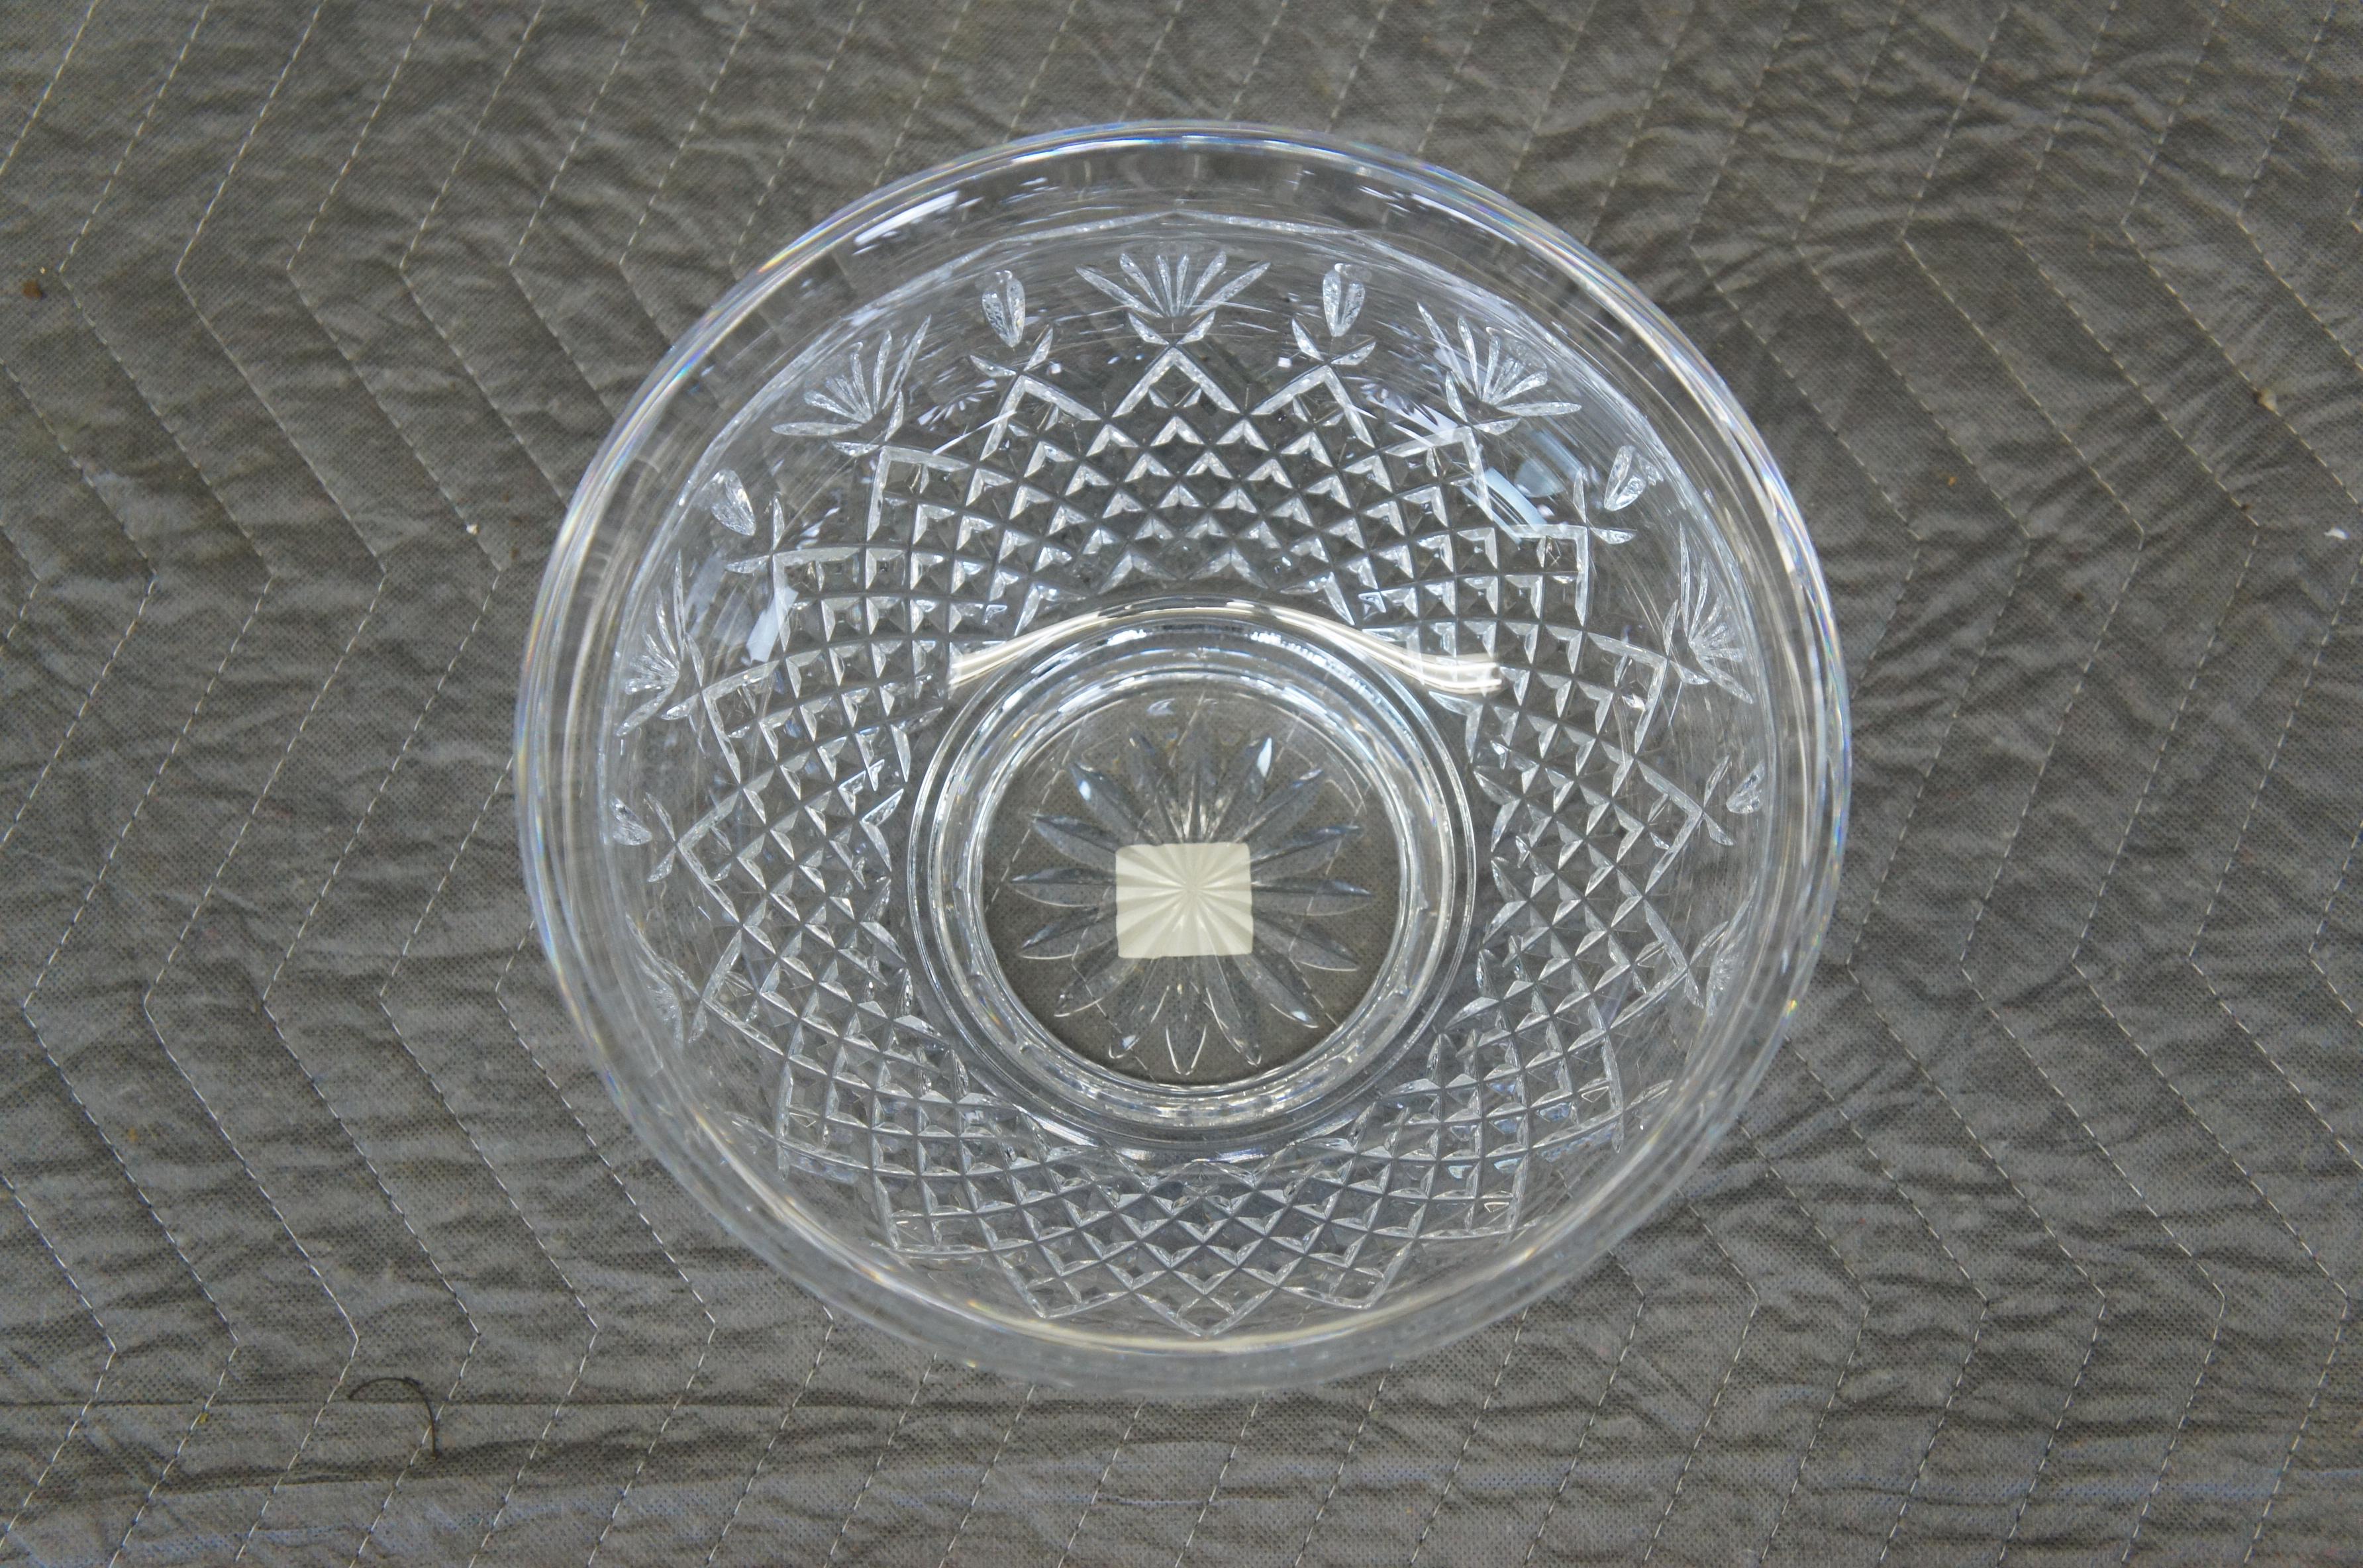 Vintage Waterford Irish Lead Crystal Killarney Pedestal Bowl Centerpiece In Good Condition For Sale In Dayton, OH